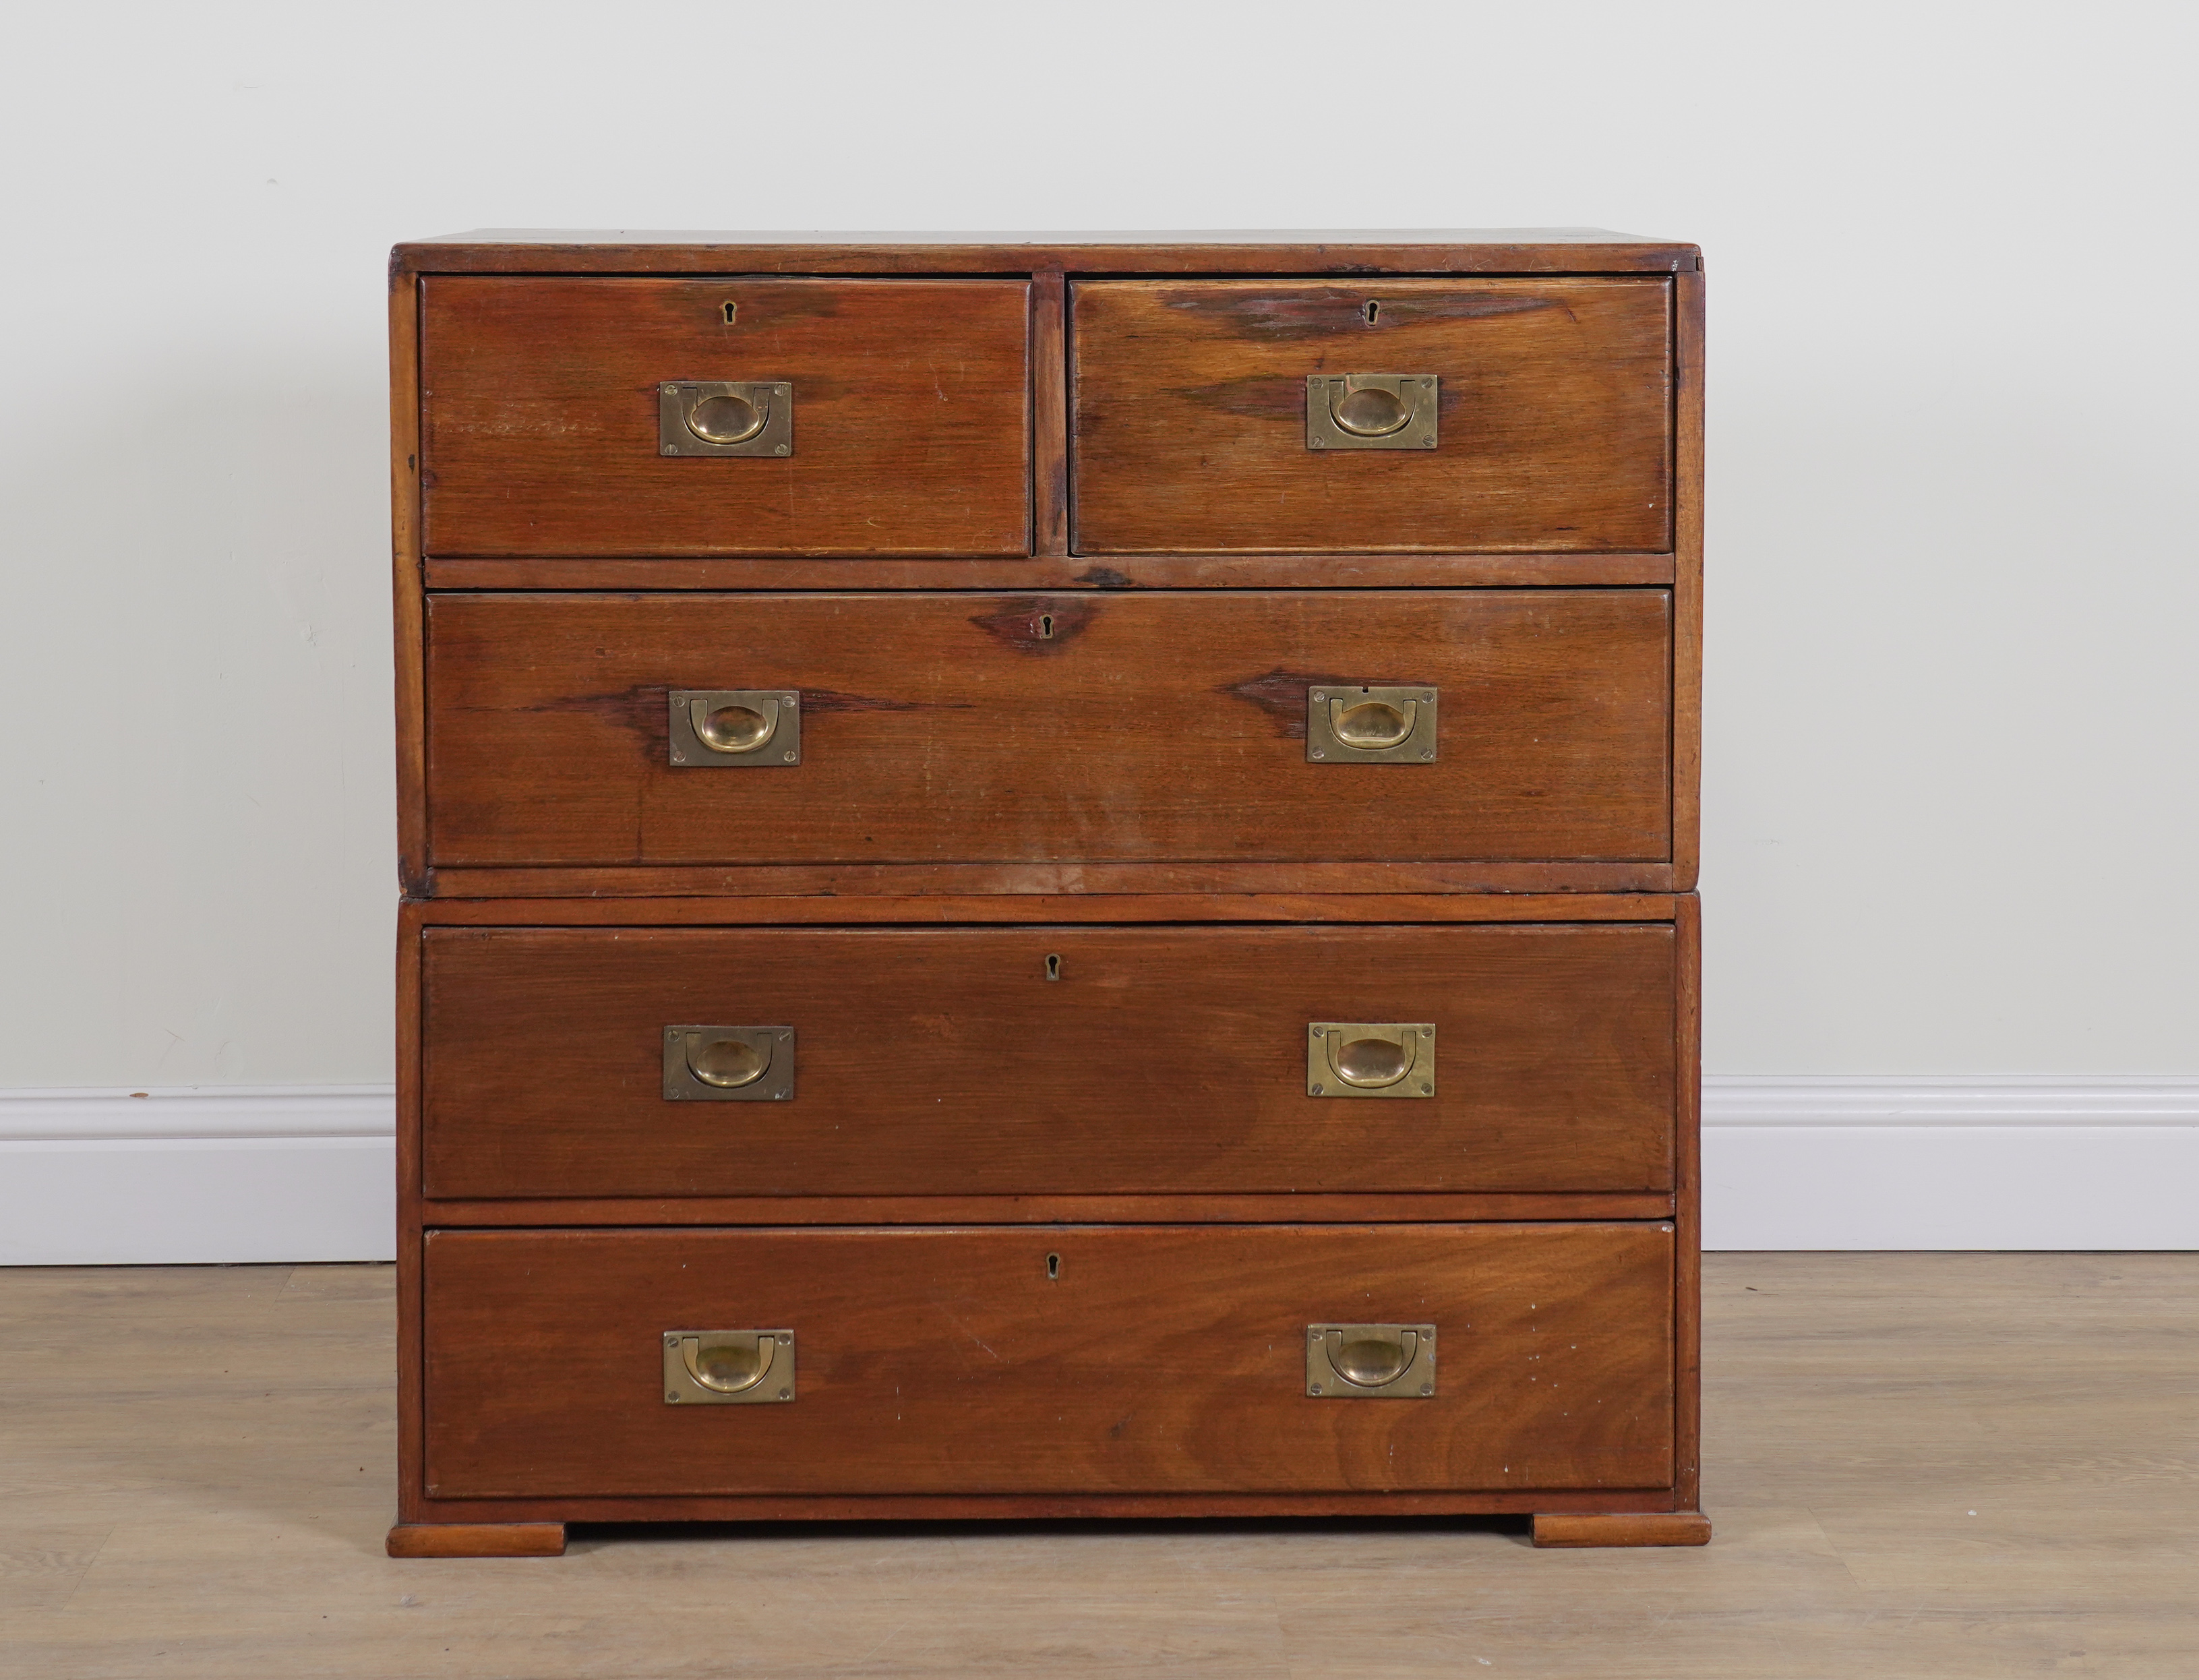 AN EARLY 20TH CENTURY TEAK FIVE DRAWER TWO PART CAMPAIGN STYLE CHEST - Image 2 of 4